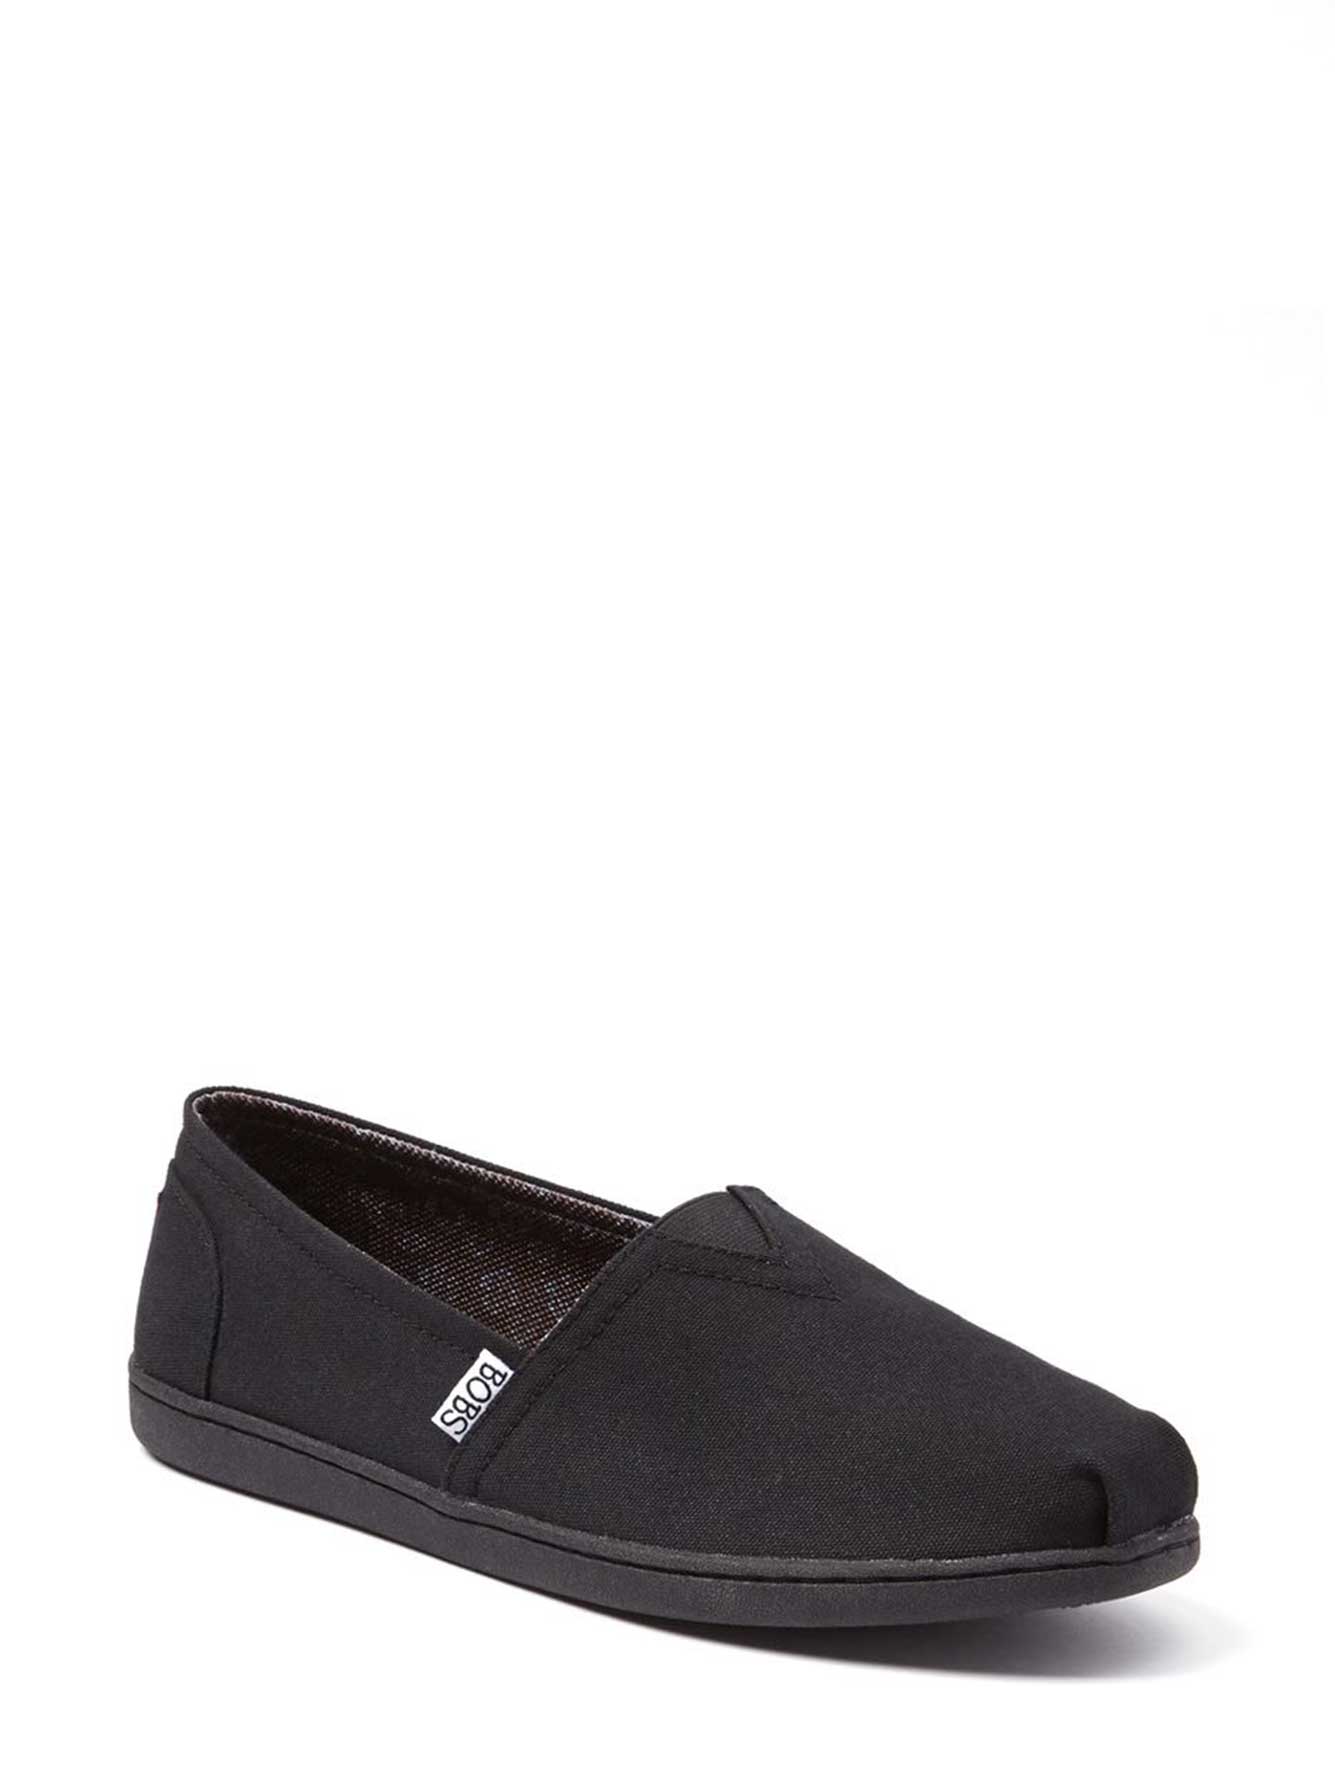 wide width toms style shoes